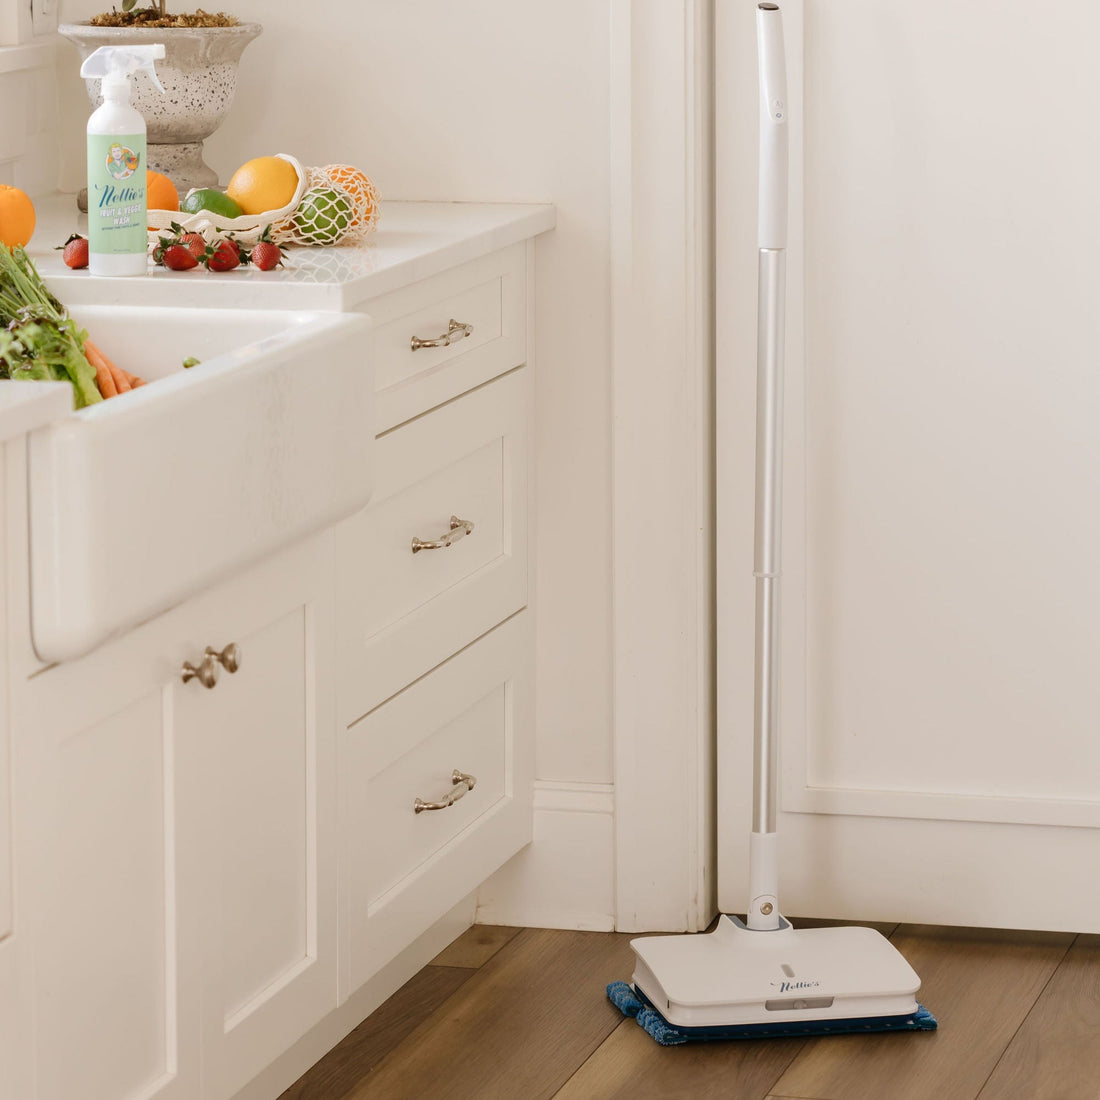 Fruit and vegetable wash and fruit on counter with electric mop on floor 